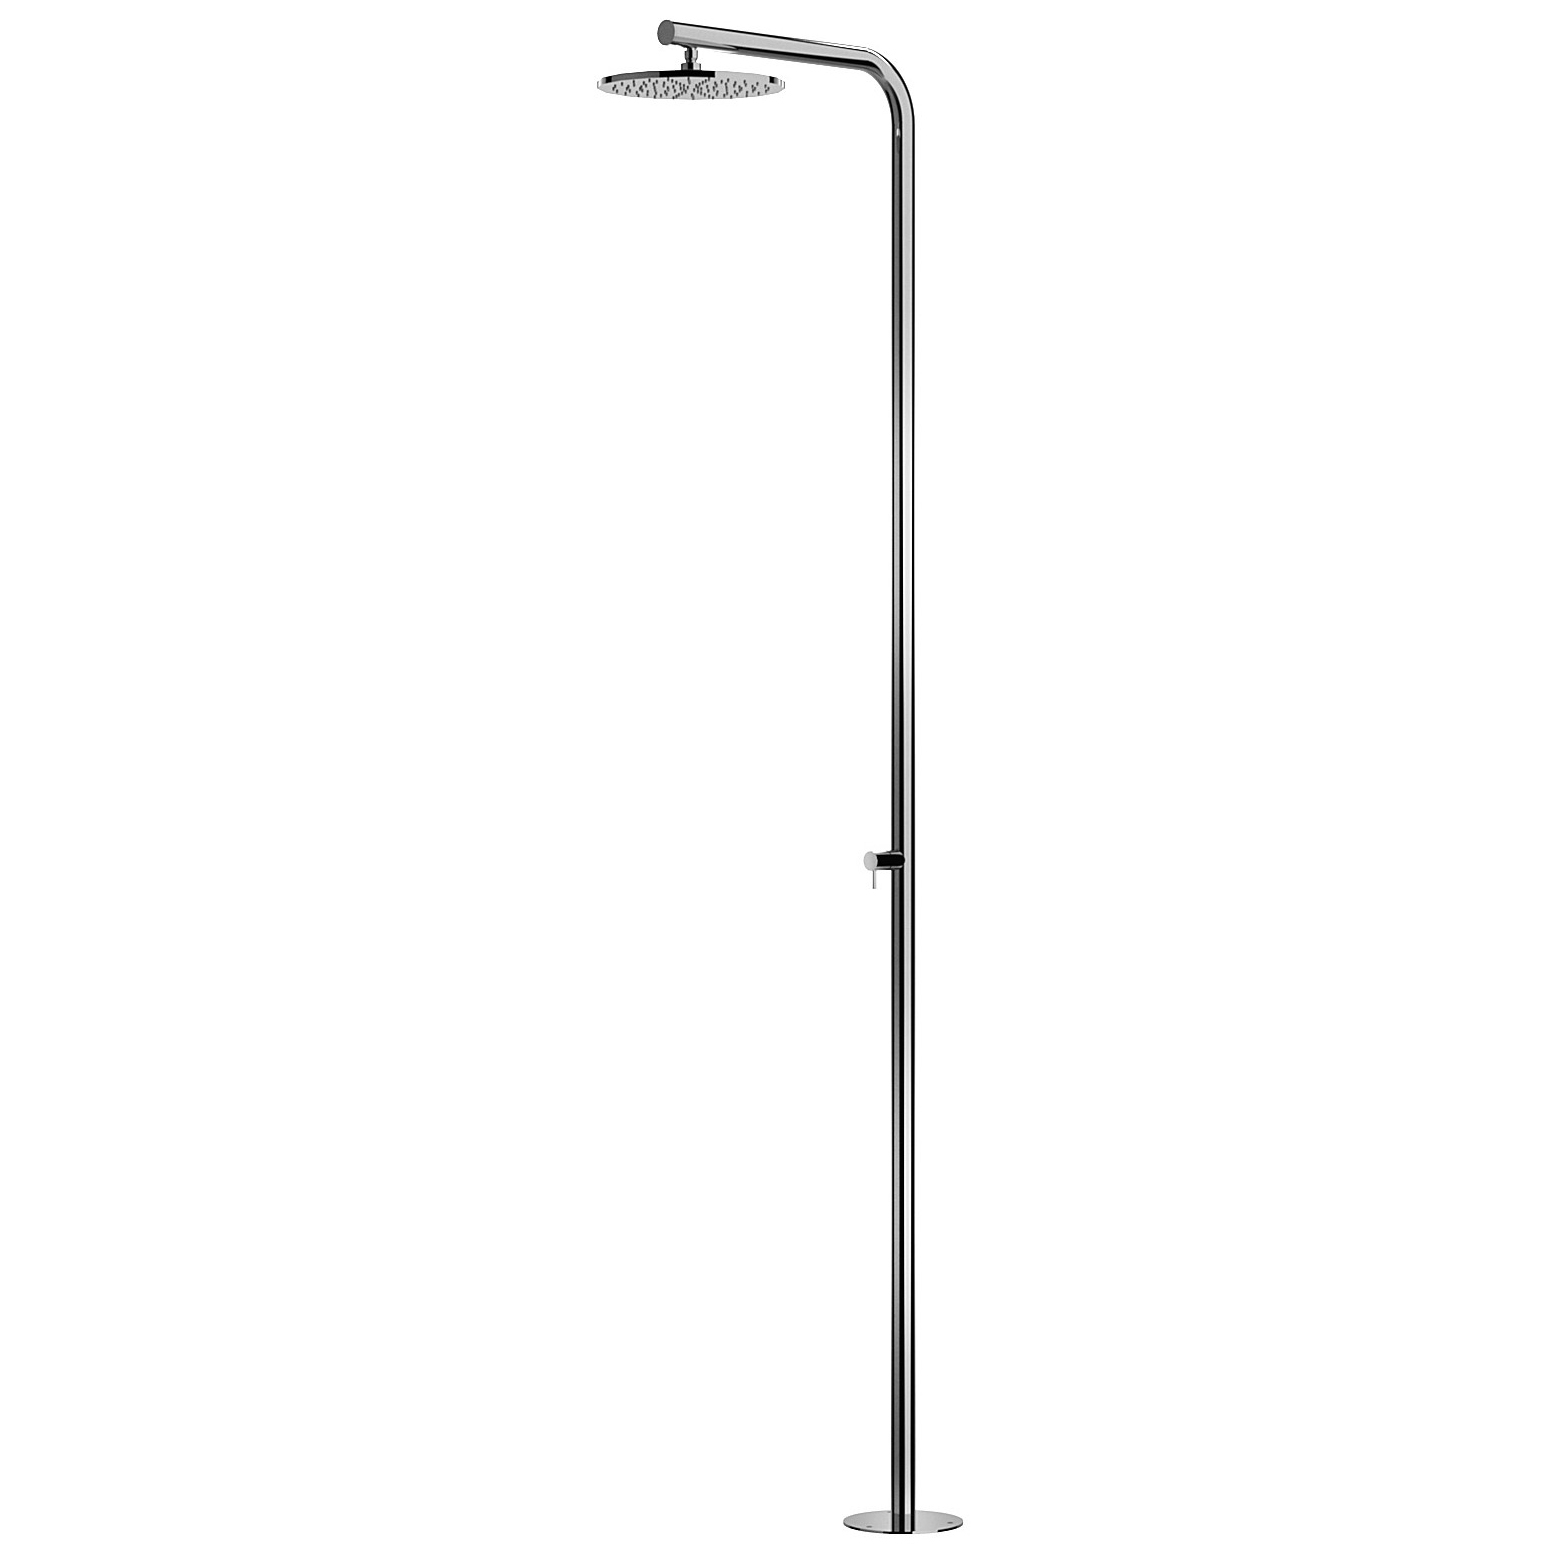 Classy C40 316 Marine Grade Stainless Steel Free Standing Hot and Cold Shower Column